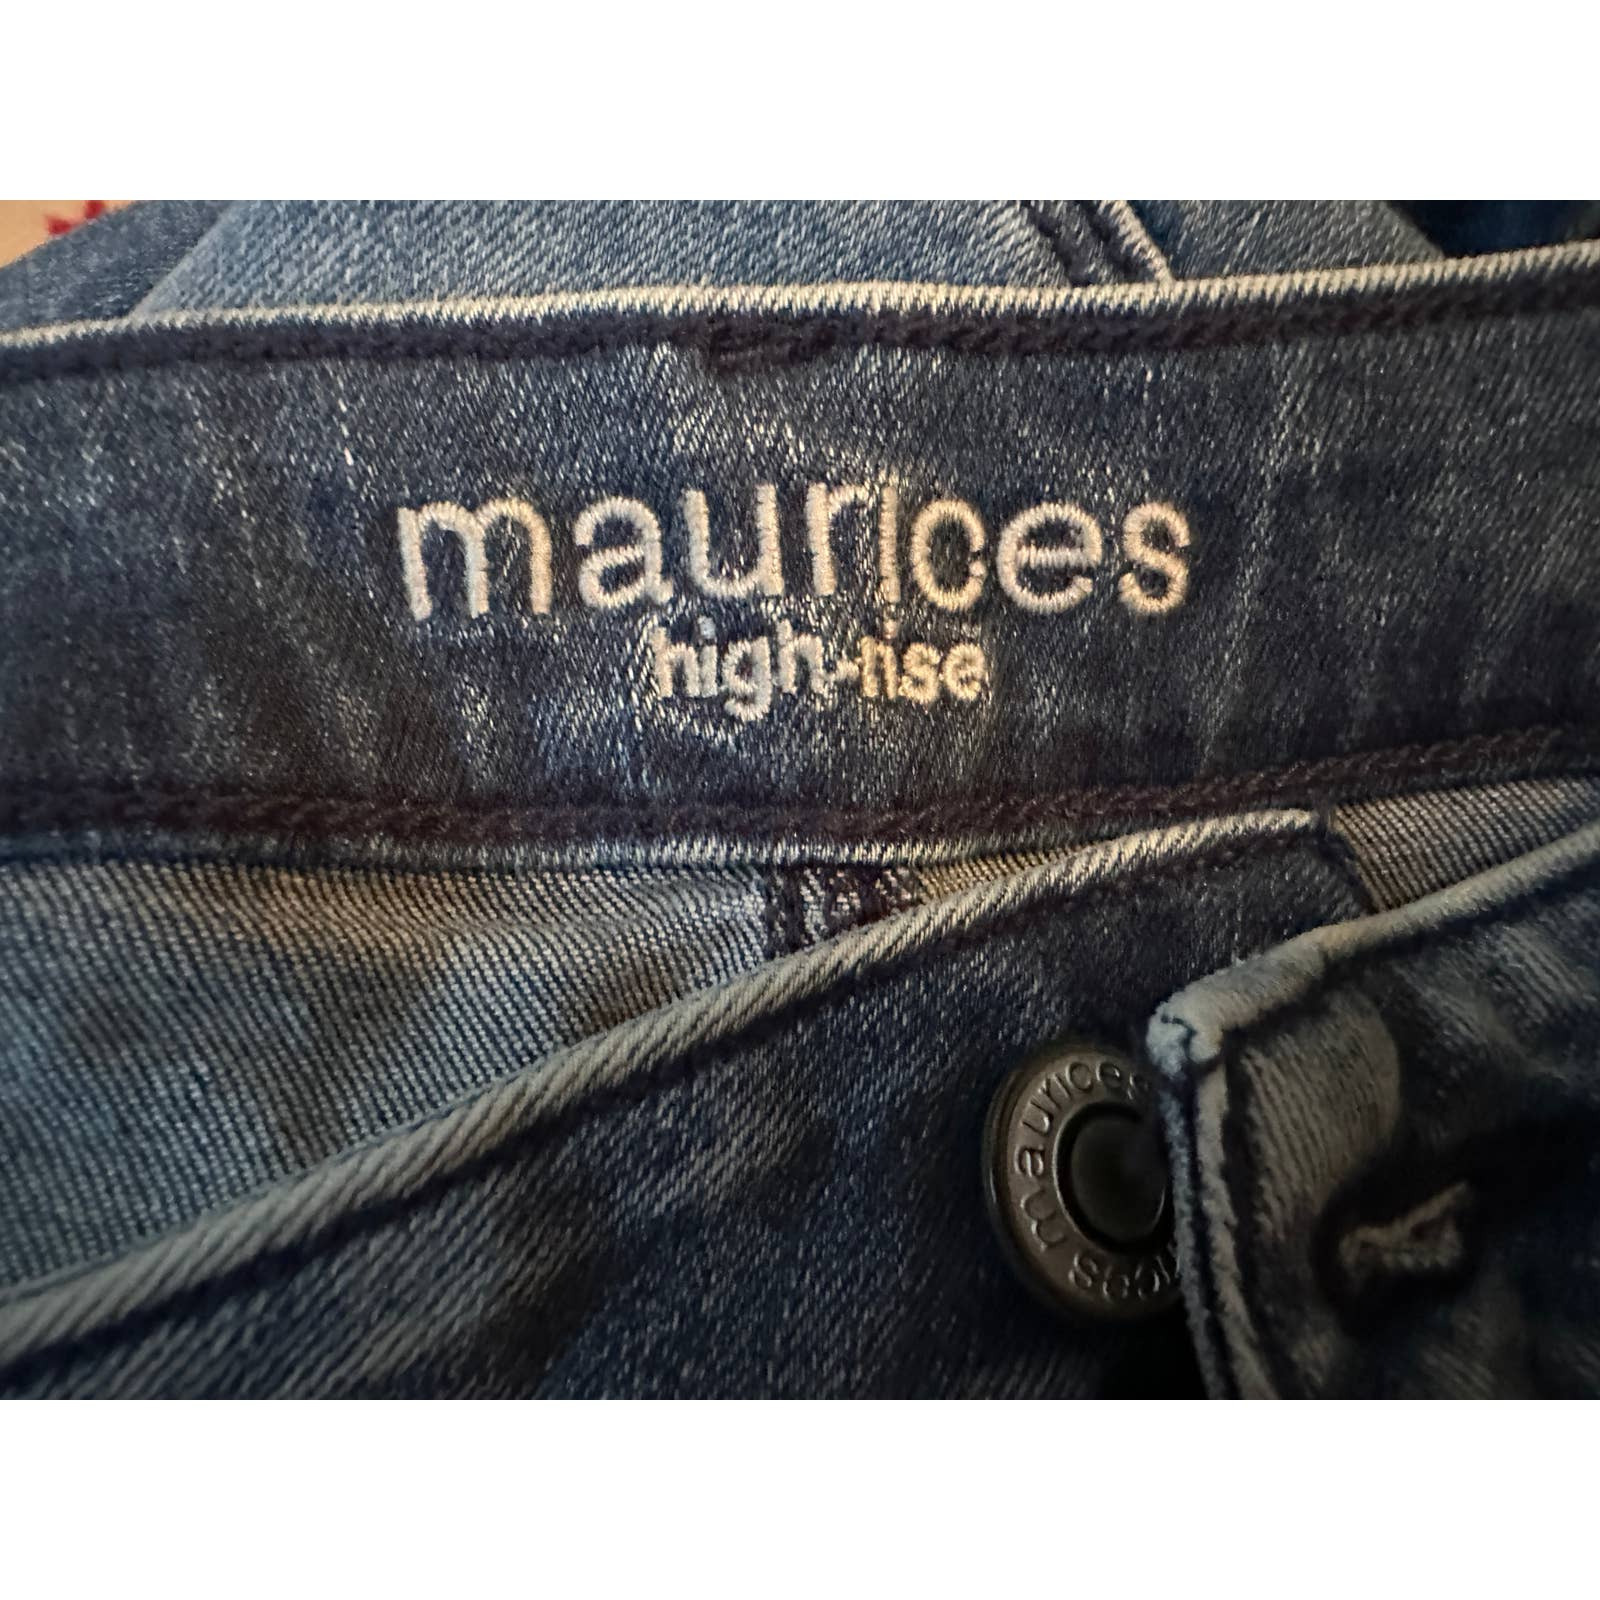 Maurices High Rise Small Blue Denim Jeans - image 3